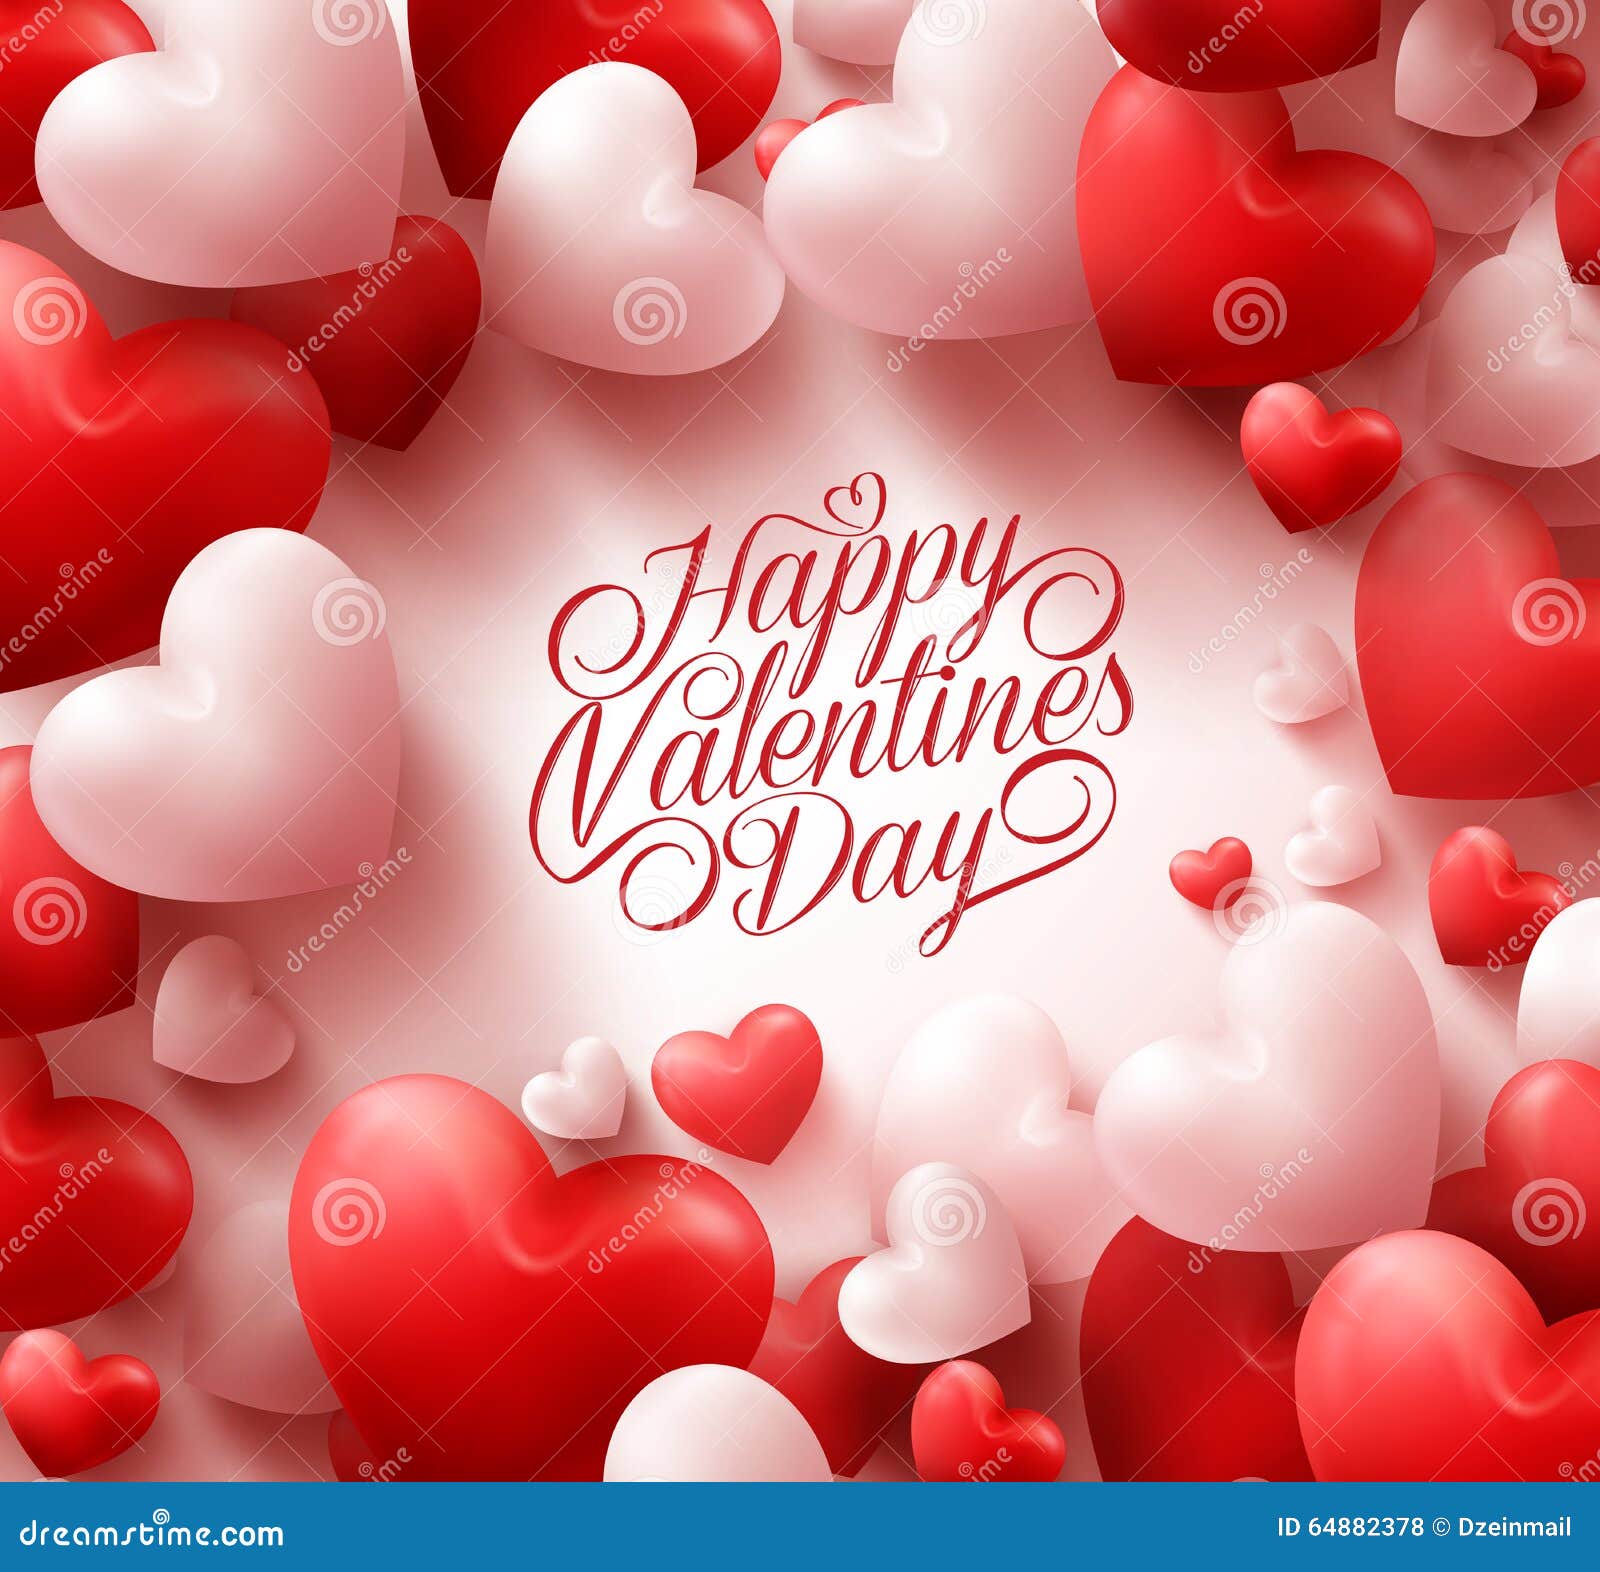 red hearts background with sweet happy valentines day greetings